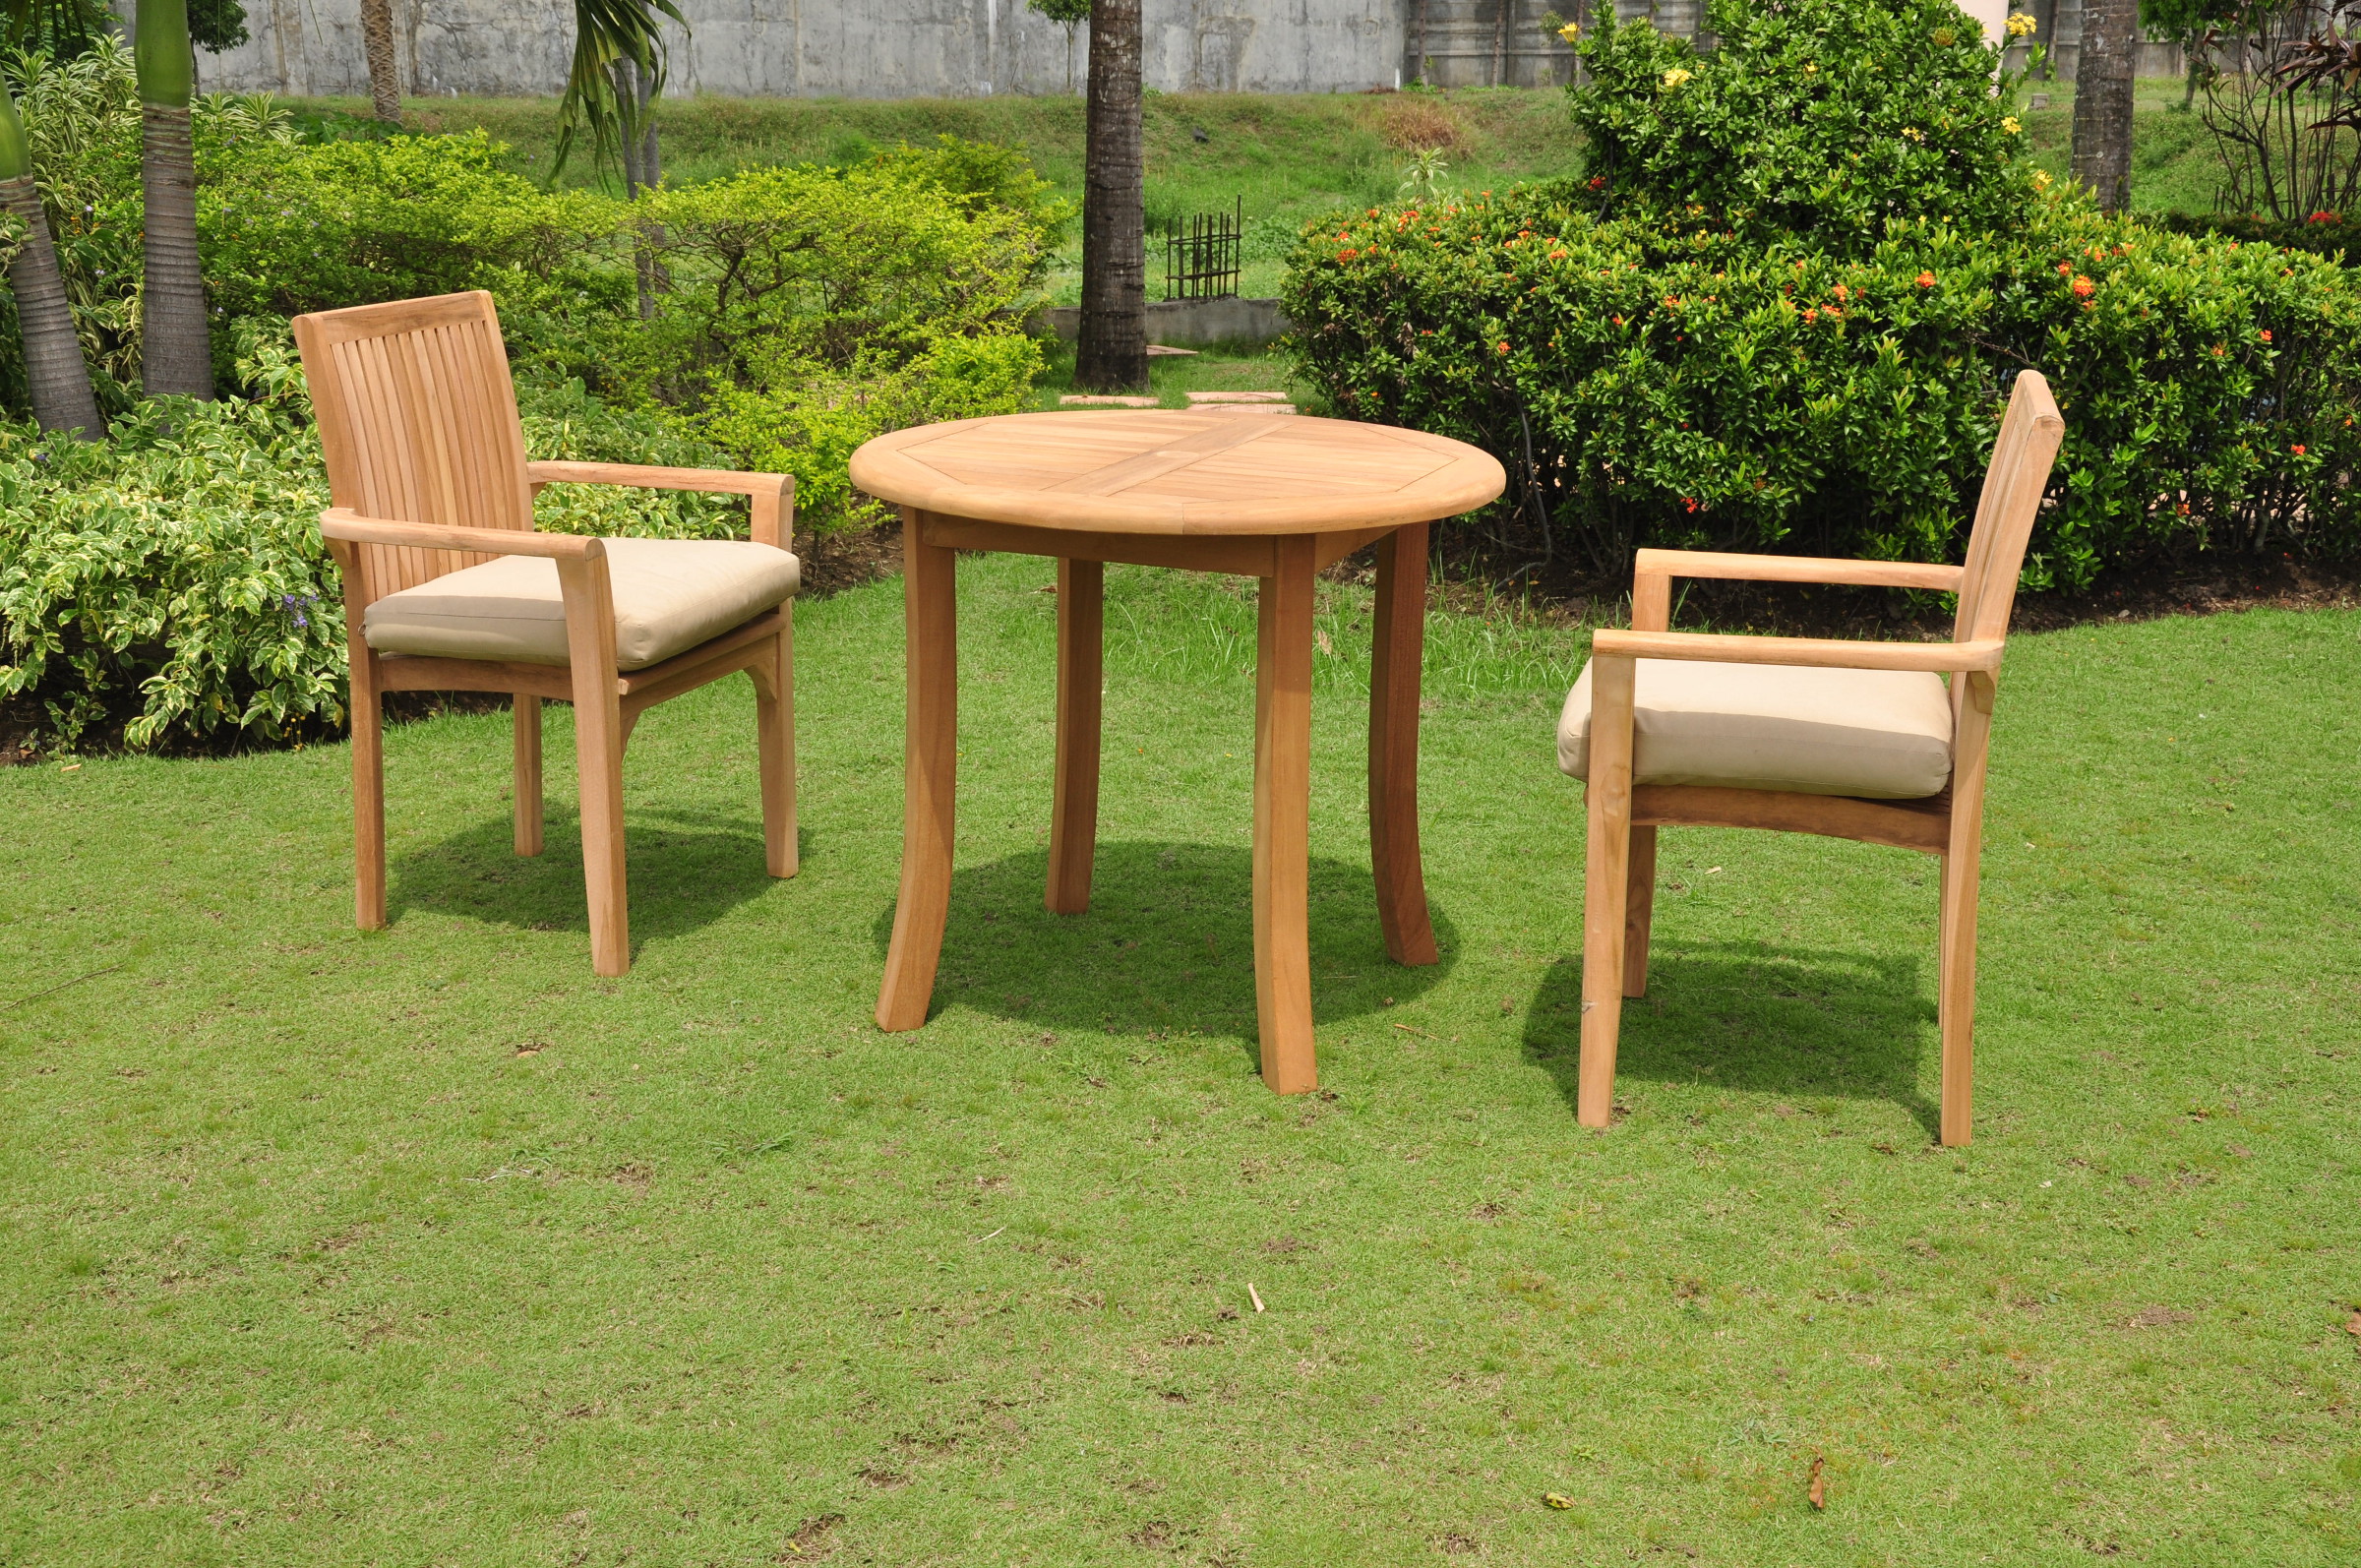 Teak Dining Set:2 Seater 3 Pc -36" Round Table And 2 Lua Stacking Arm Chairs Outdoor Patio Grade-A Teak Wood WholesaleTeak #WMDSLU1 - image 1 of 4